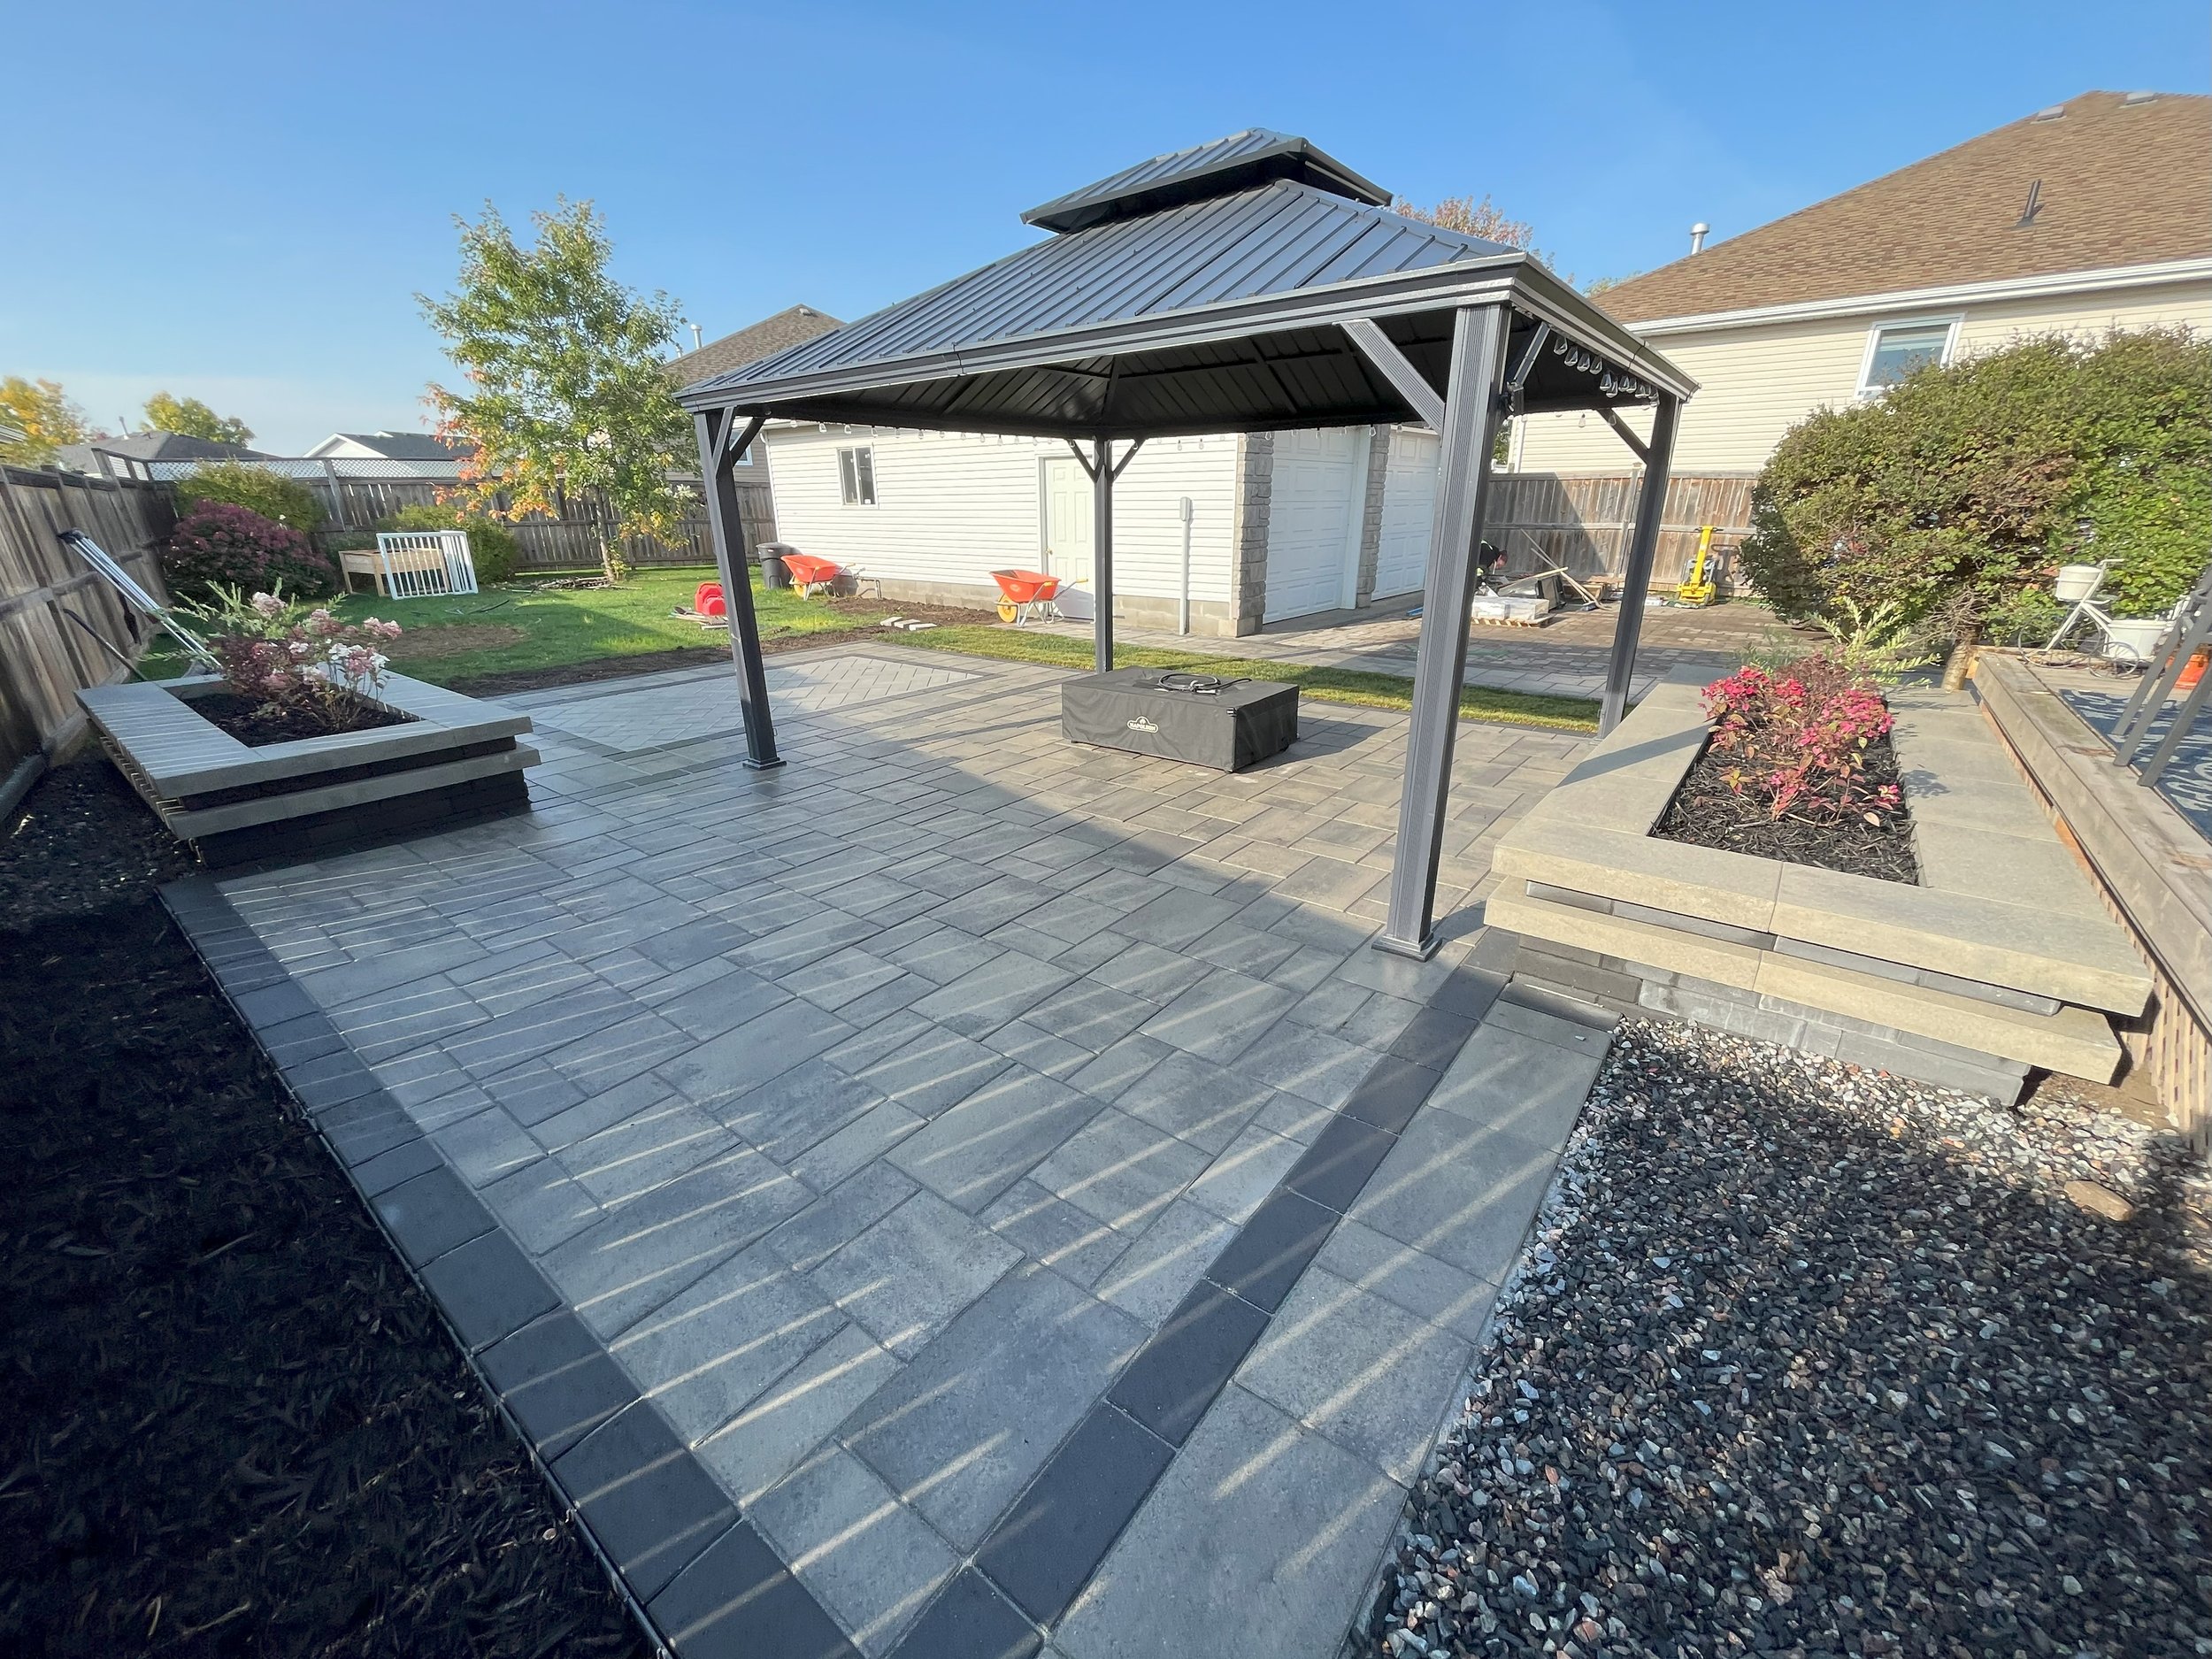 This Beautiful Patio was totally designed by Pour Boys using the best rendering software available. From design to Construction - we're Thunder Bay's Best.